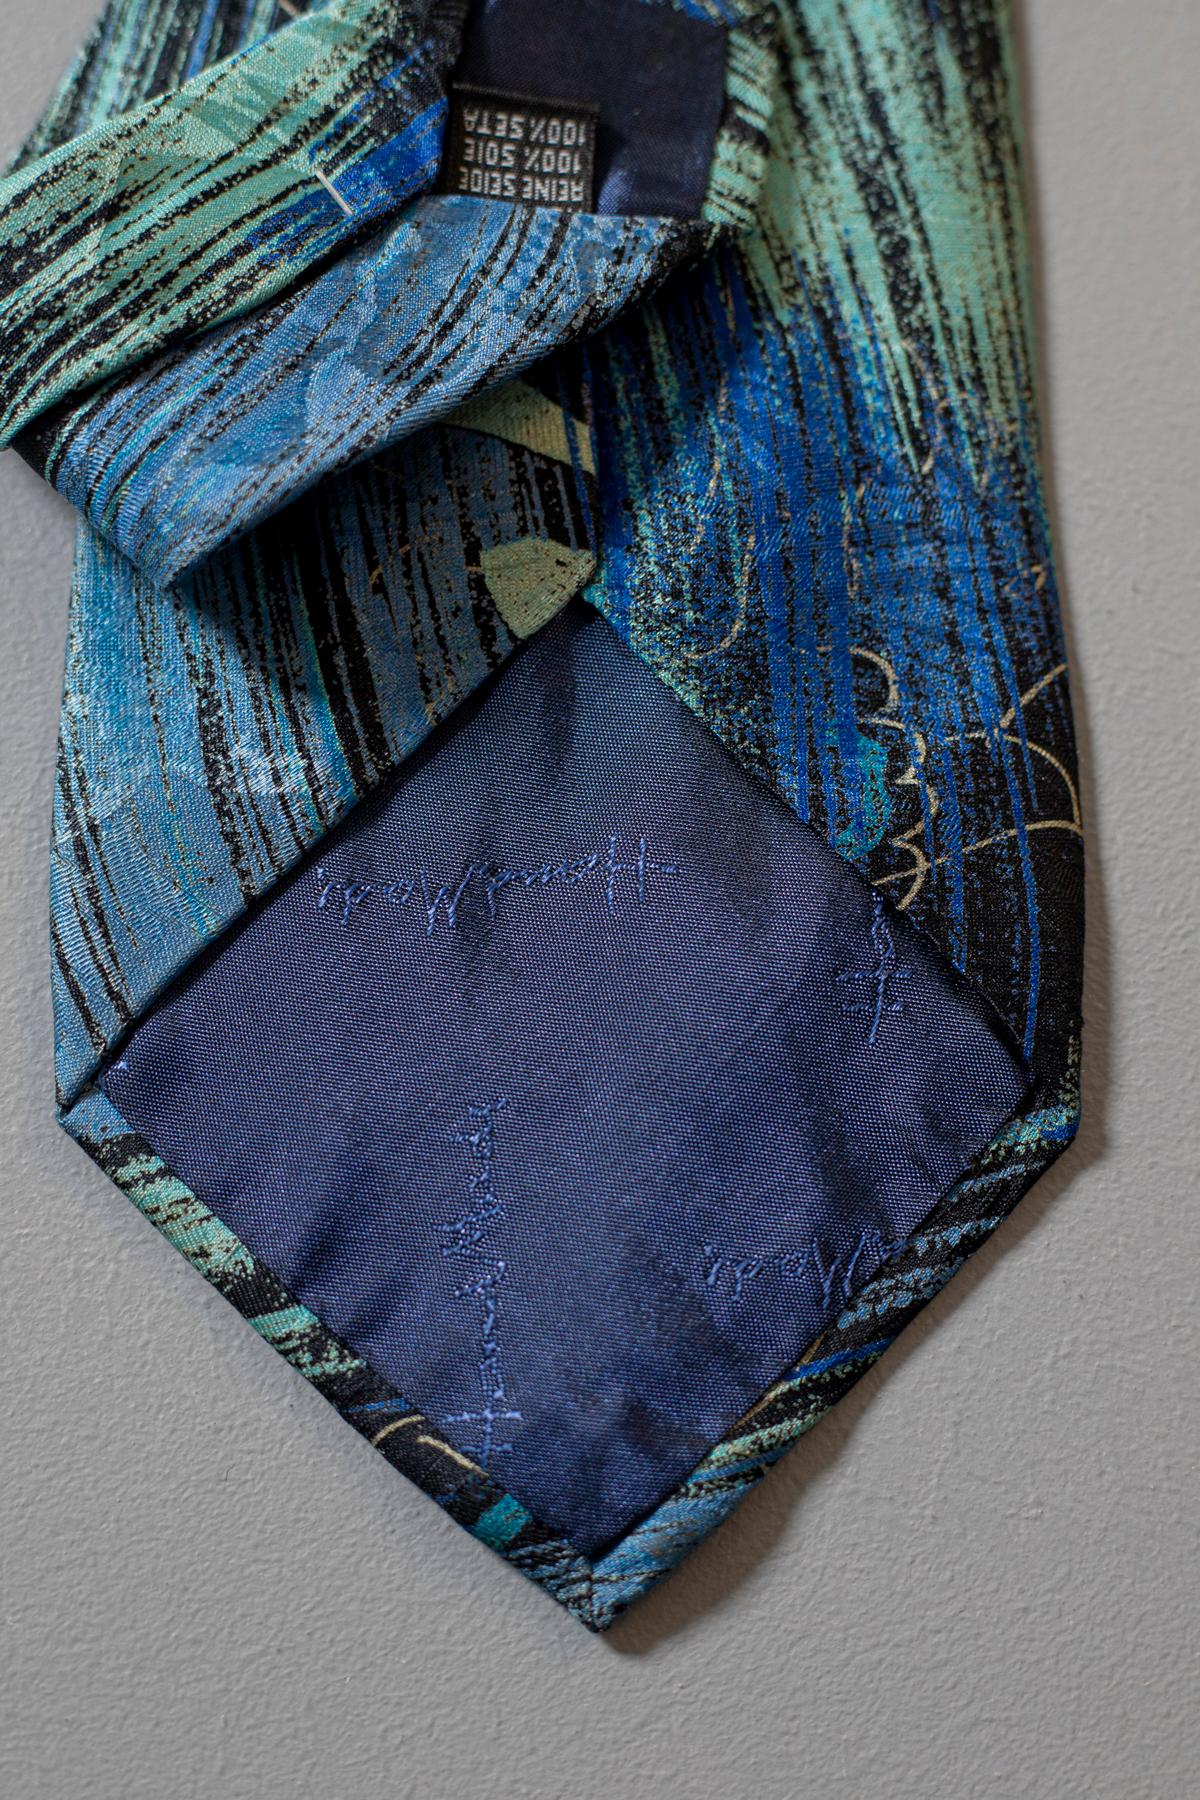 Blue Vintage Cardelli 100% silk tie in light blue, blue and aqua green For Sale